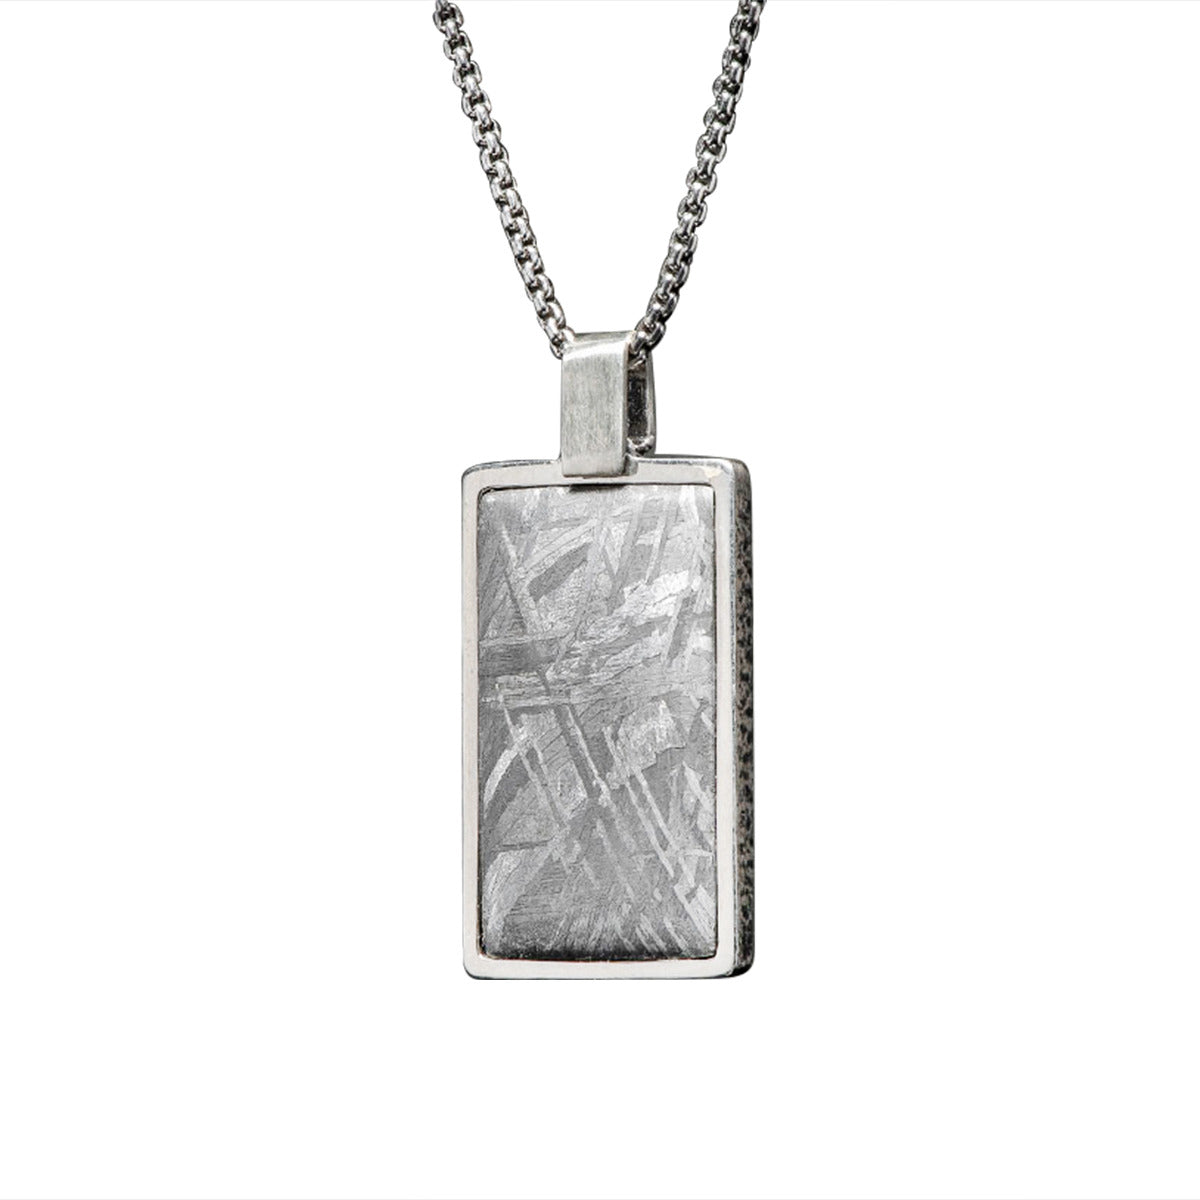 AWNL Men's Octagon Column Pendant Necklace with Meteorite Sterling Silver  Chain Stylish Spiritual Jewelry Gift for Men | Amazon.com